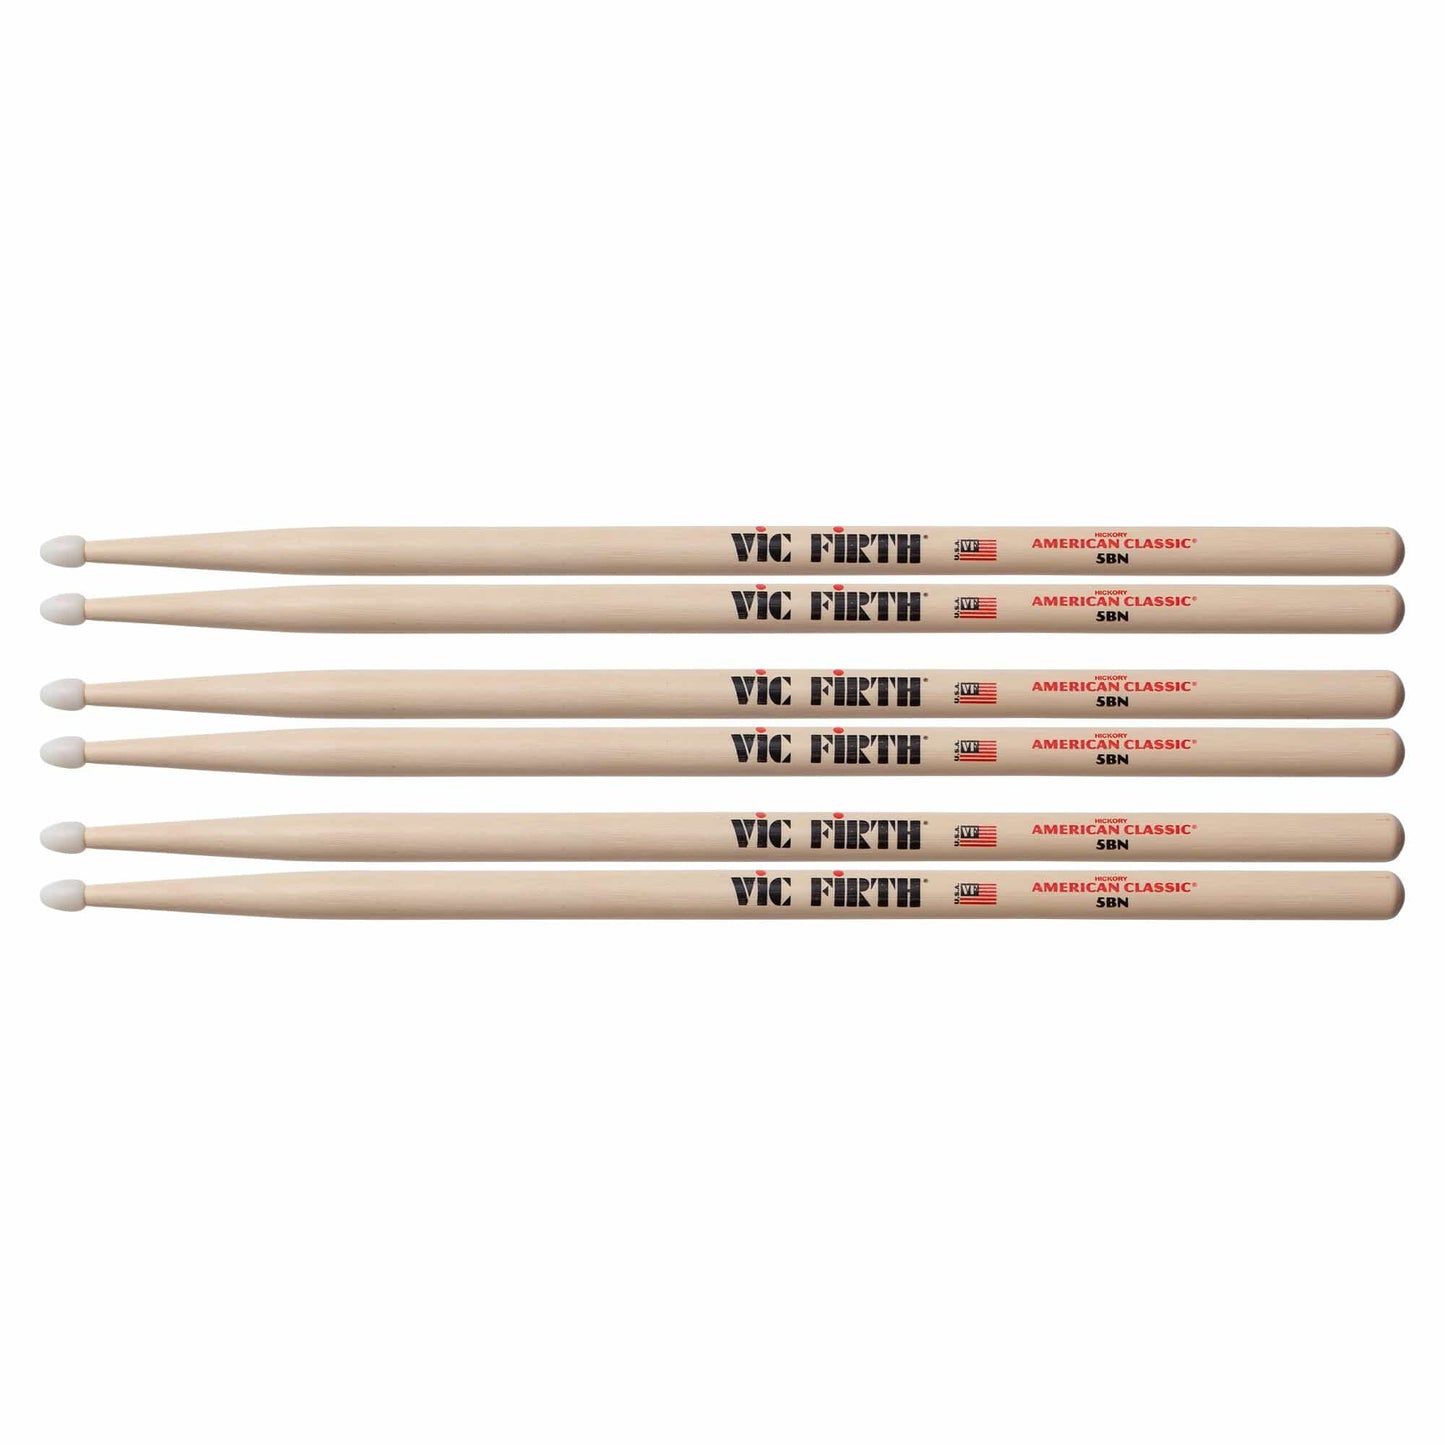 Vic Firth American Classic 5B Nylon Tip Drum Sticks (3 Pair Bundle) Drums and Percussion / Parts and Accessories / Drum Sticks and Mallets